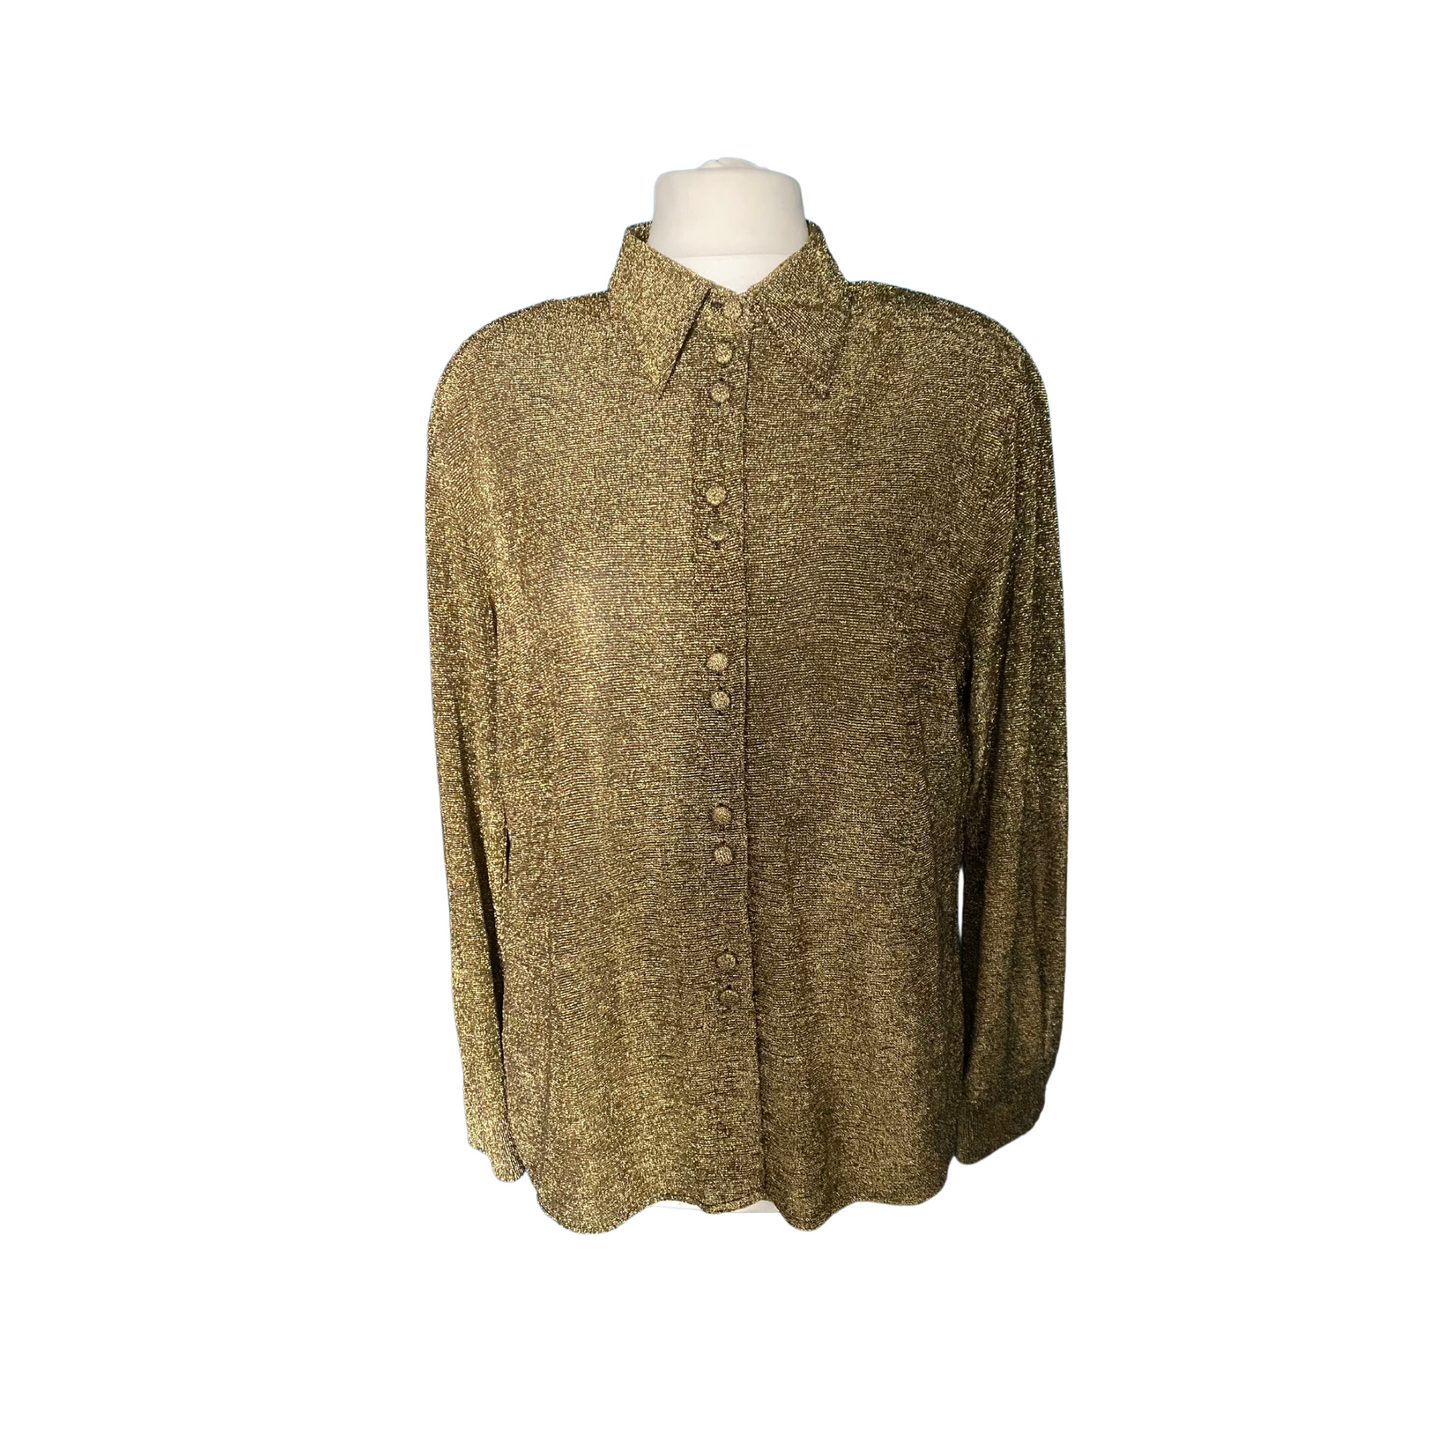 Vintage long sleeve shirt in sparkling gold, perfect for 70s disco enthusiasts.